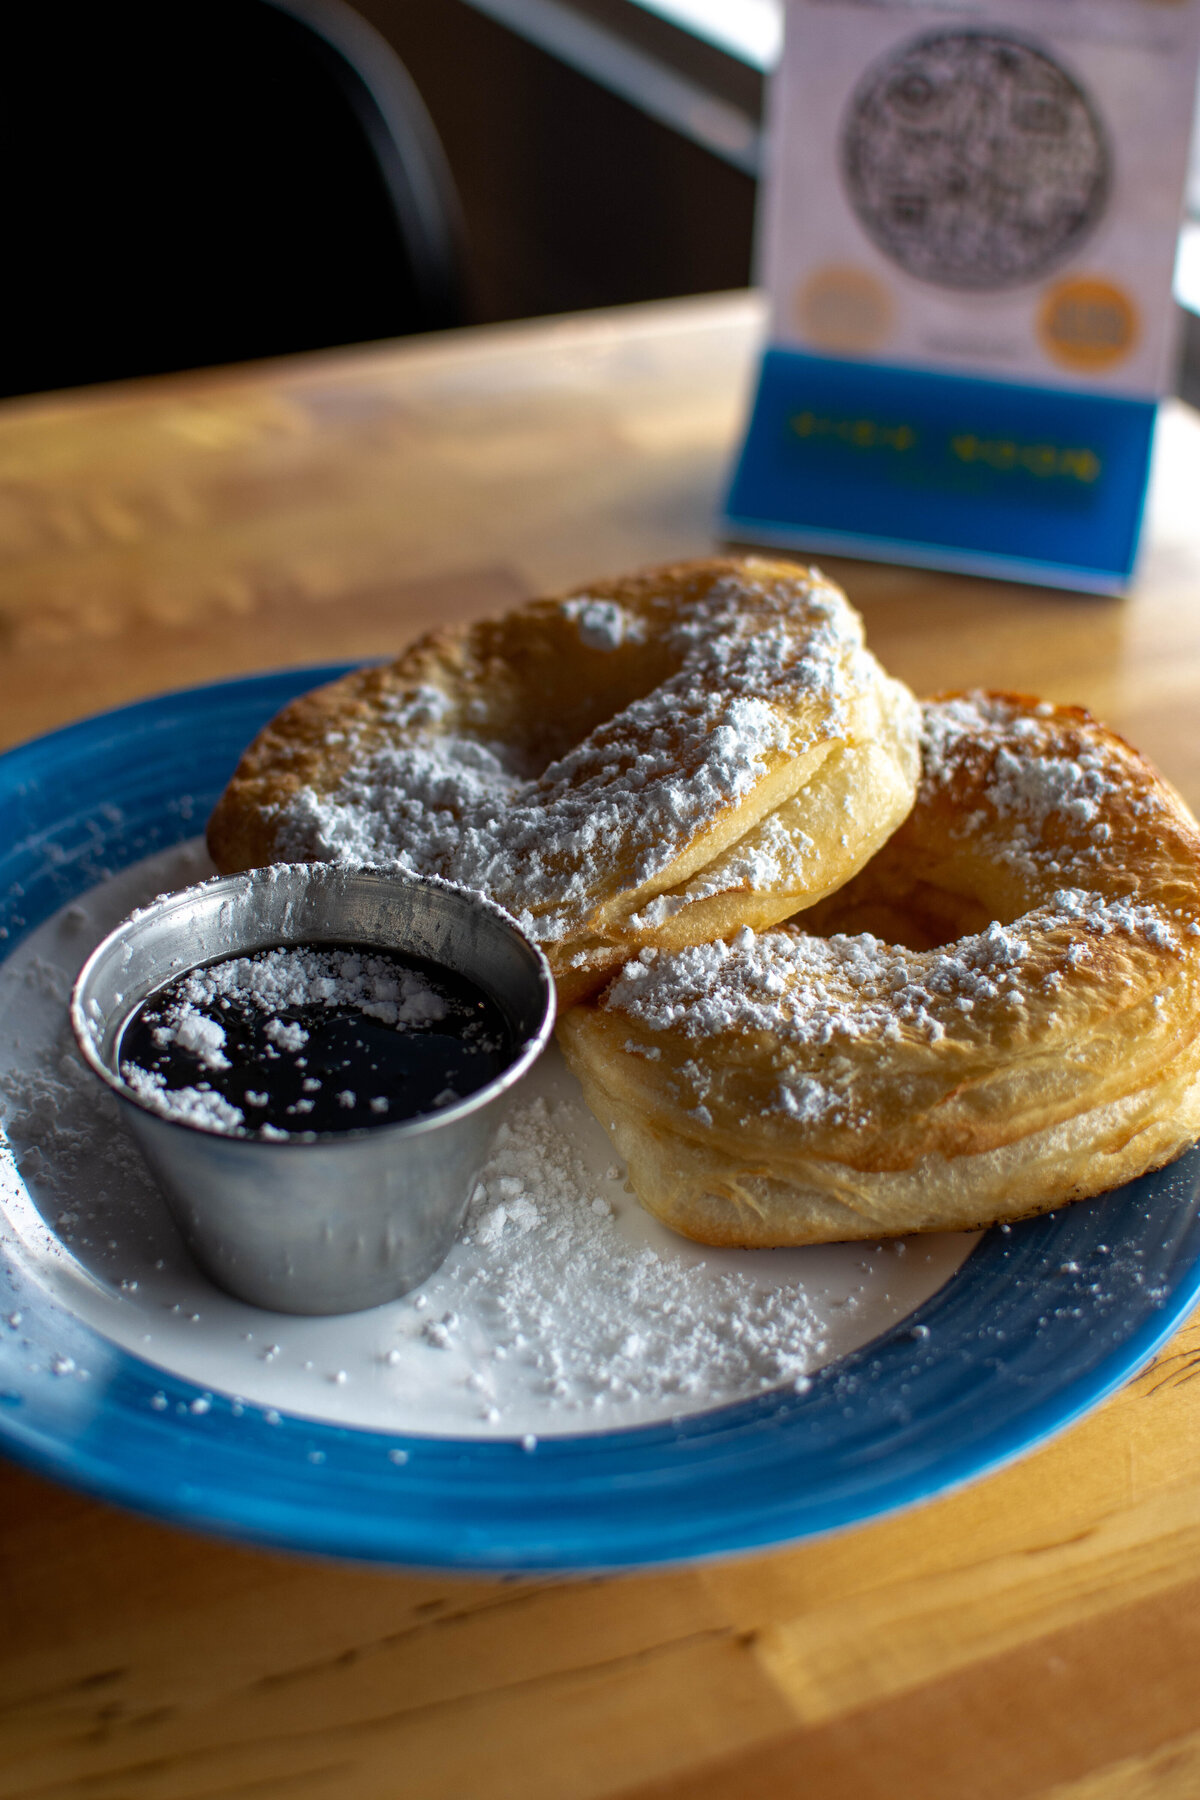 Two beignet donuts with syrup on a blue and white plate